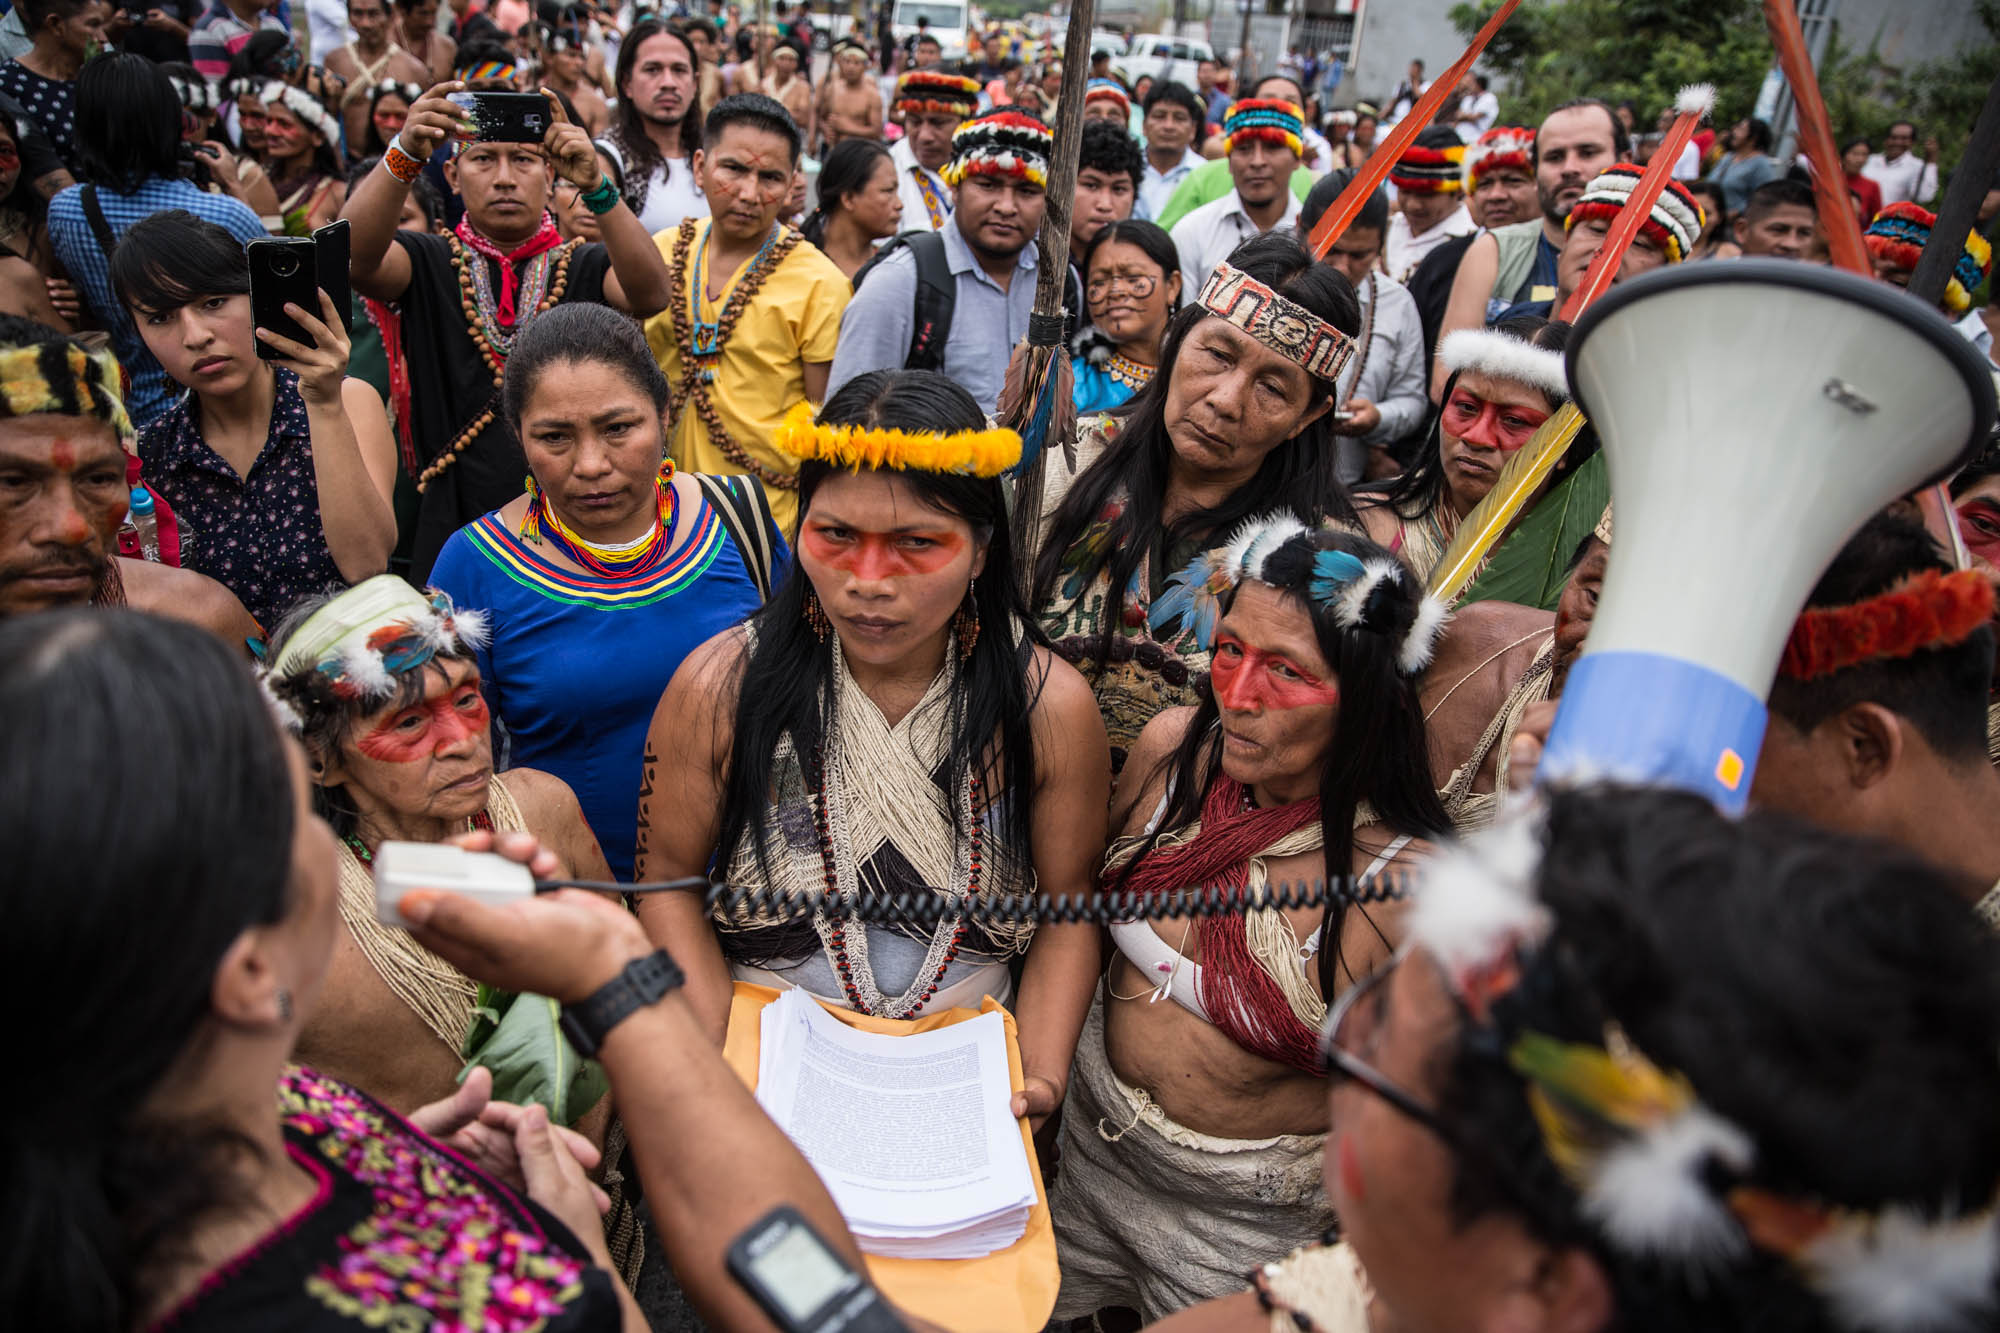 In 2019, Nemonte Nenquimo, Waorani leader, prepares to file a historic lawsuit against the Ecuadorian government for failure to consult with her people in the auctioning of their ancestral rainforest lands to the international oil industry. Indigenous leaders from across the Amazon rally around her leadership. (Mitch Anderson—Amazon Frontlines)